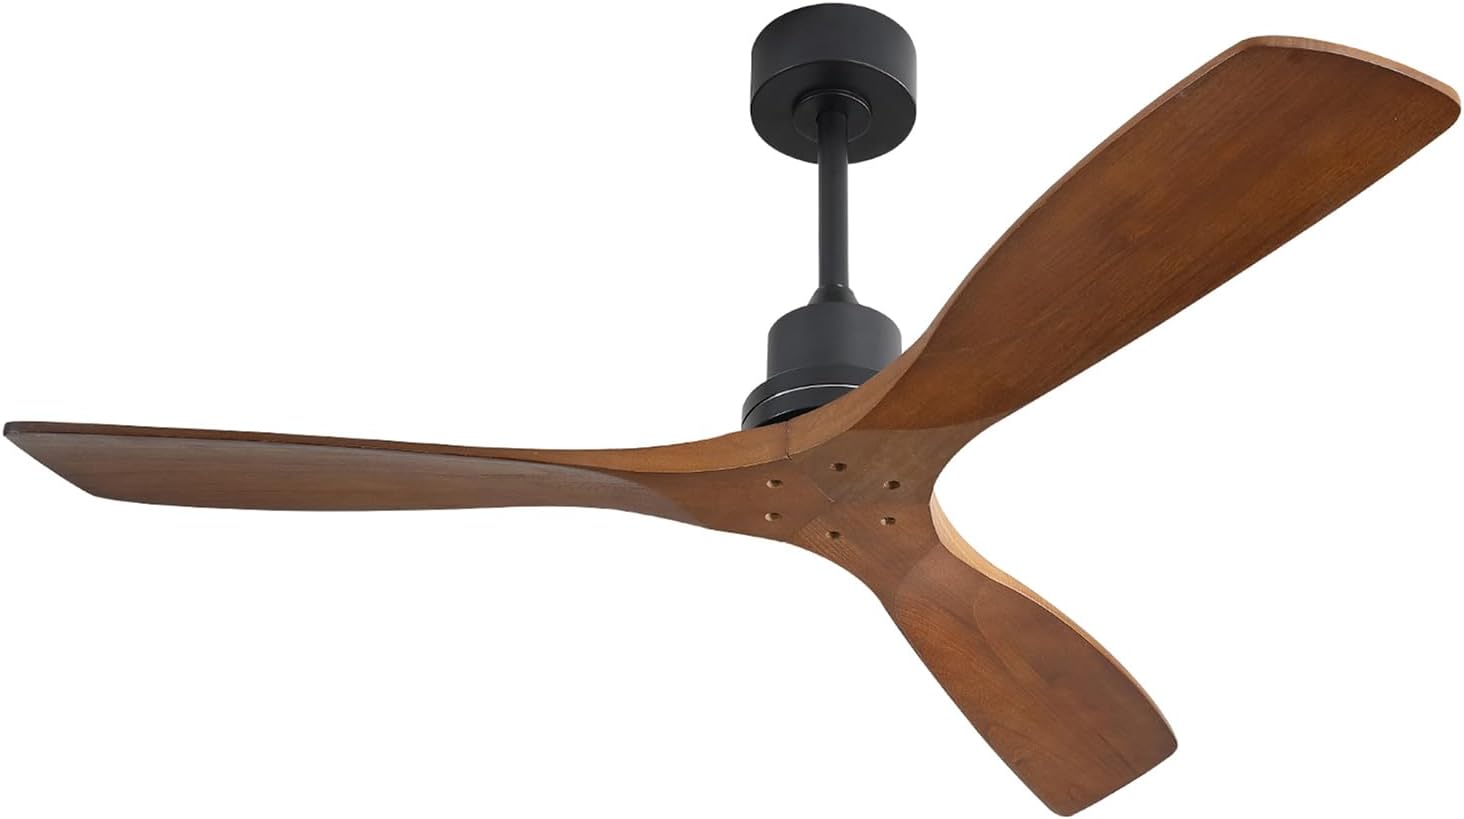 Sofucor 52 Inch Ceiling Fan No Light Outdoor Ceiling Fan Remote Controlled 3 Carved Wood Fan Blades Reversible DC Motor Ceiling Fan Without Light for Farmhouse Modern Style